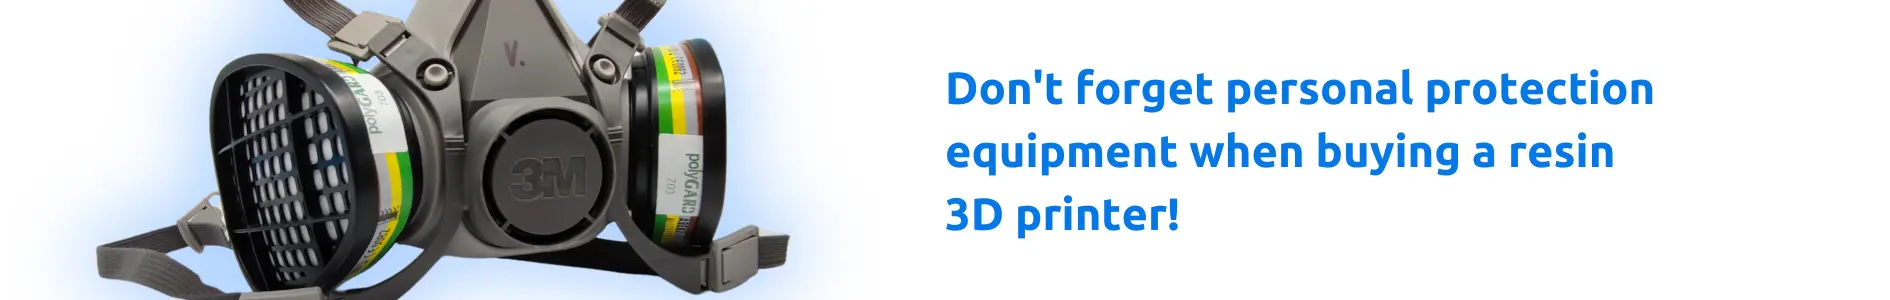 Don't forget personal protection equipment when buying a resin 3D printer!